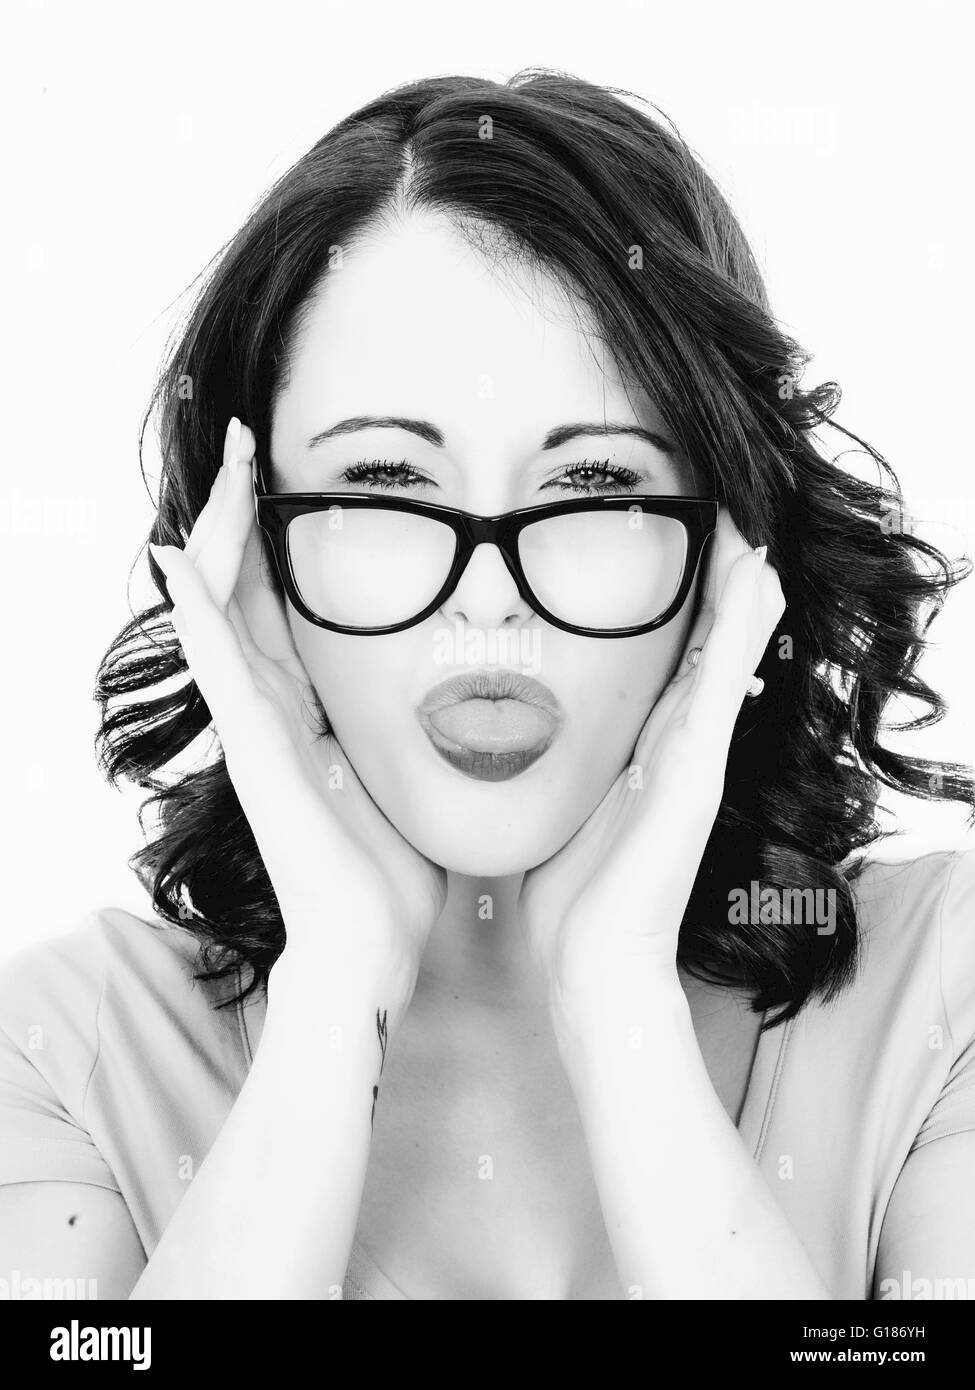 Portrait of a Woman Sticking Tongue Out in a Playful Humorous Gesture Against a White Background Stock Photo